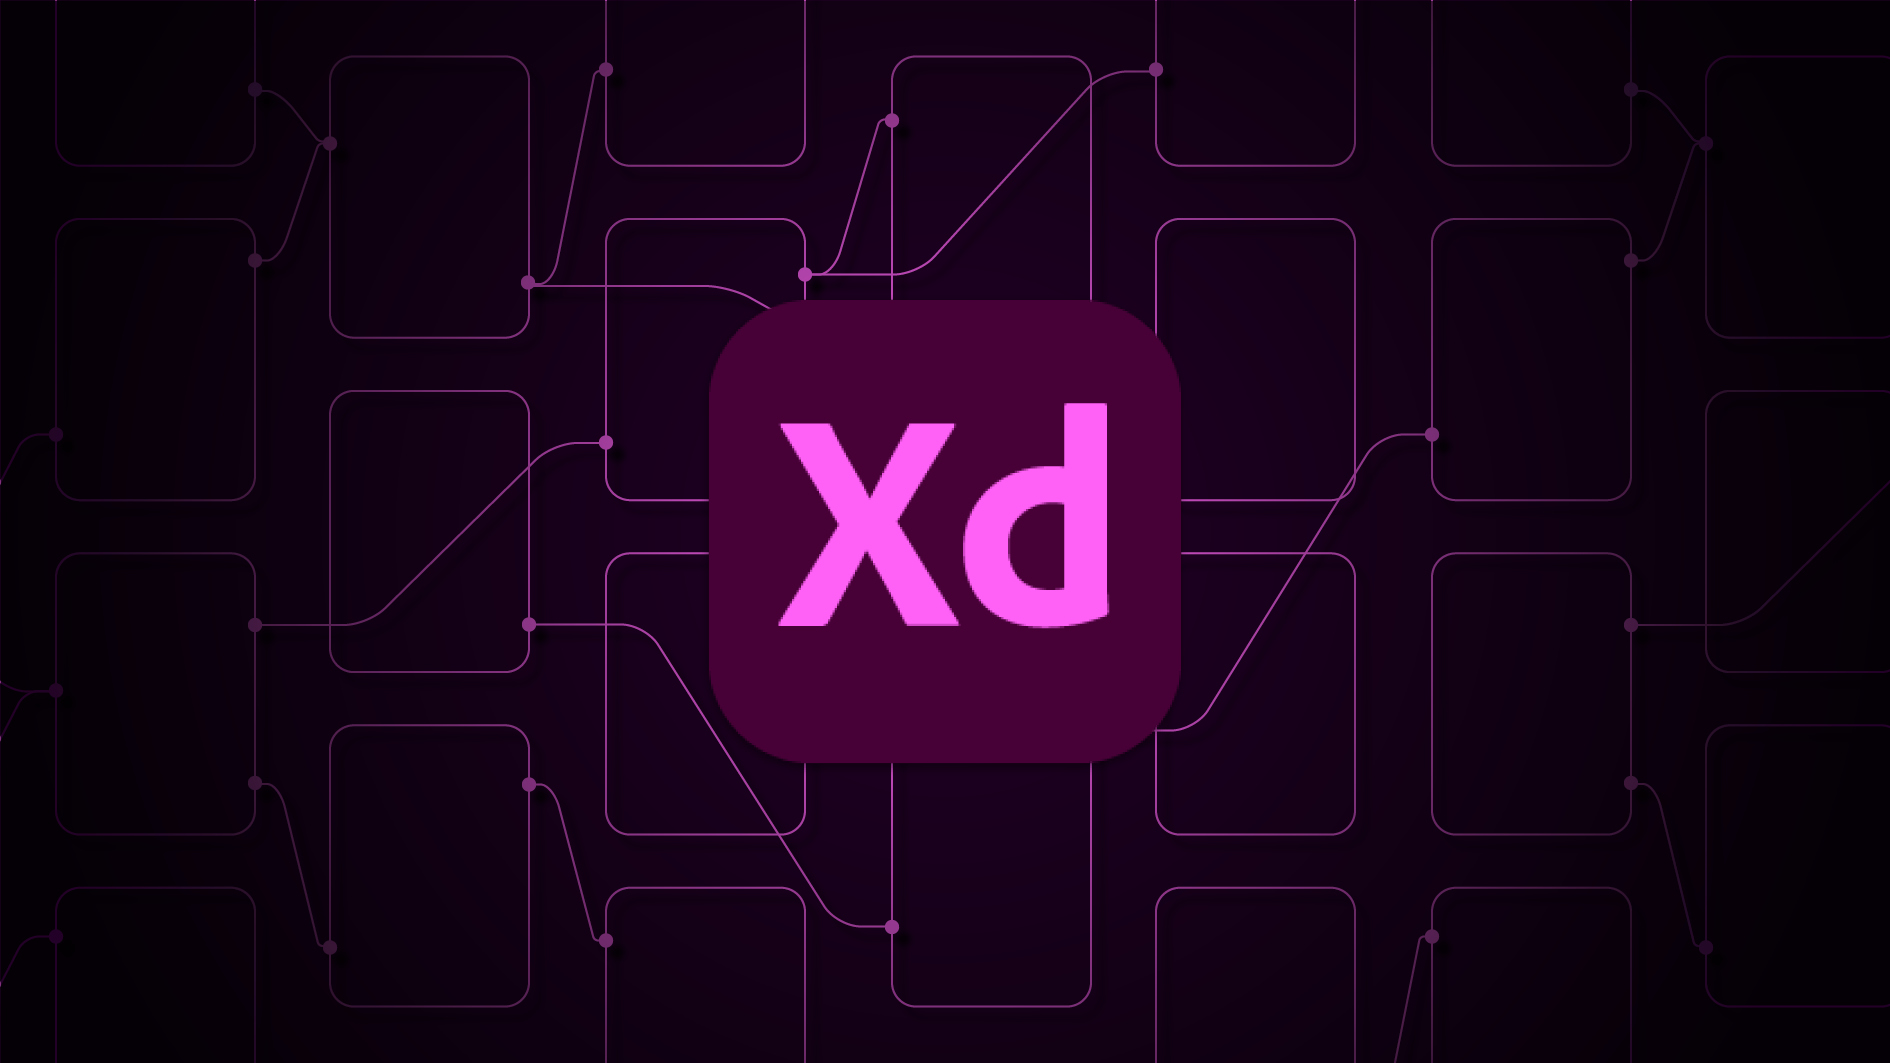 How to download Adobe XD free or with Creative Cloud